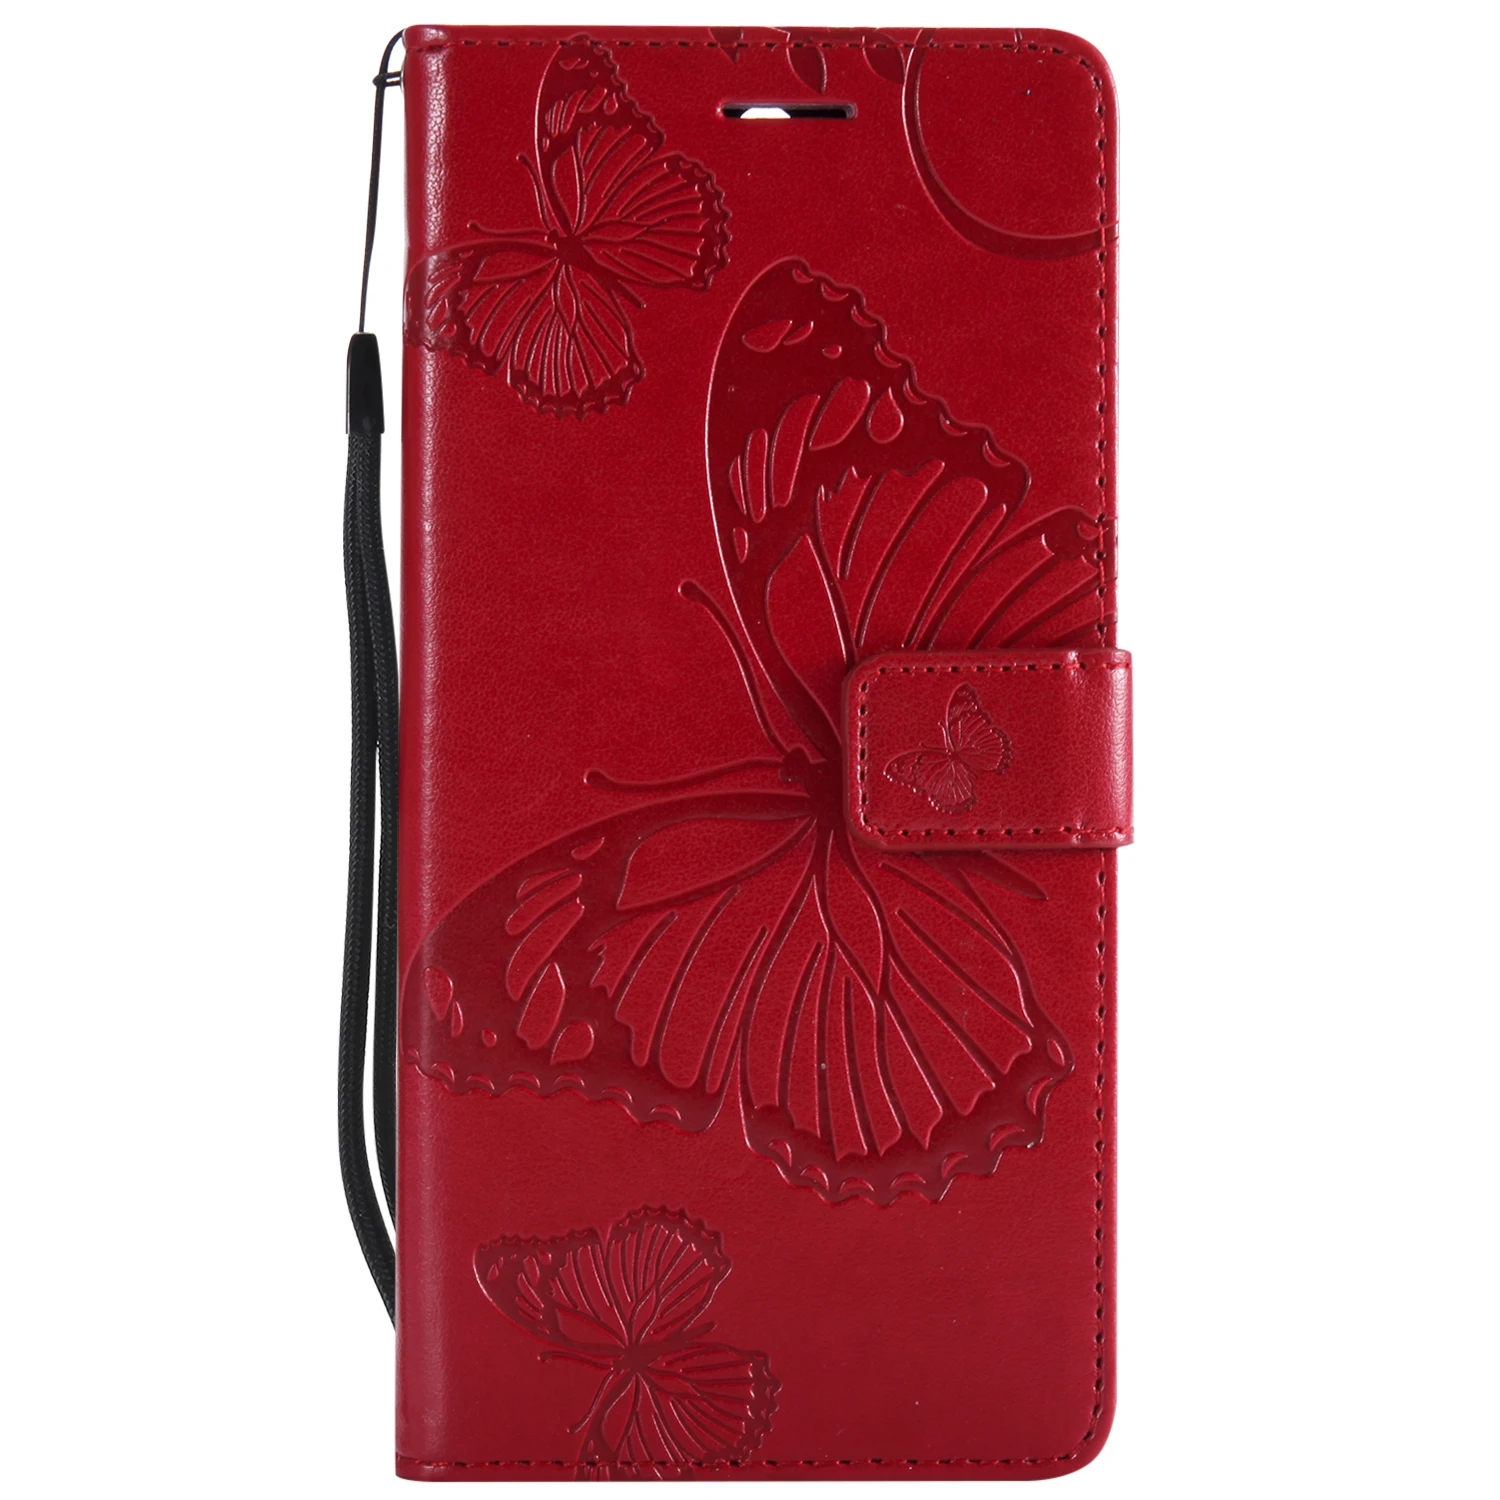 Фото Butterfly For Huawei honor 5A 6X 6A V10 8C 8X 7C 7A case Book Style Wallet Flip Leather silicone back cover fundas phone bag | Мобильные